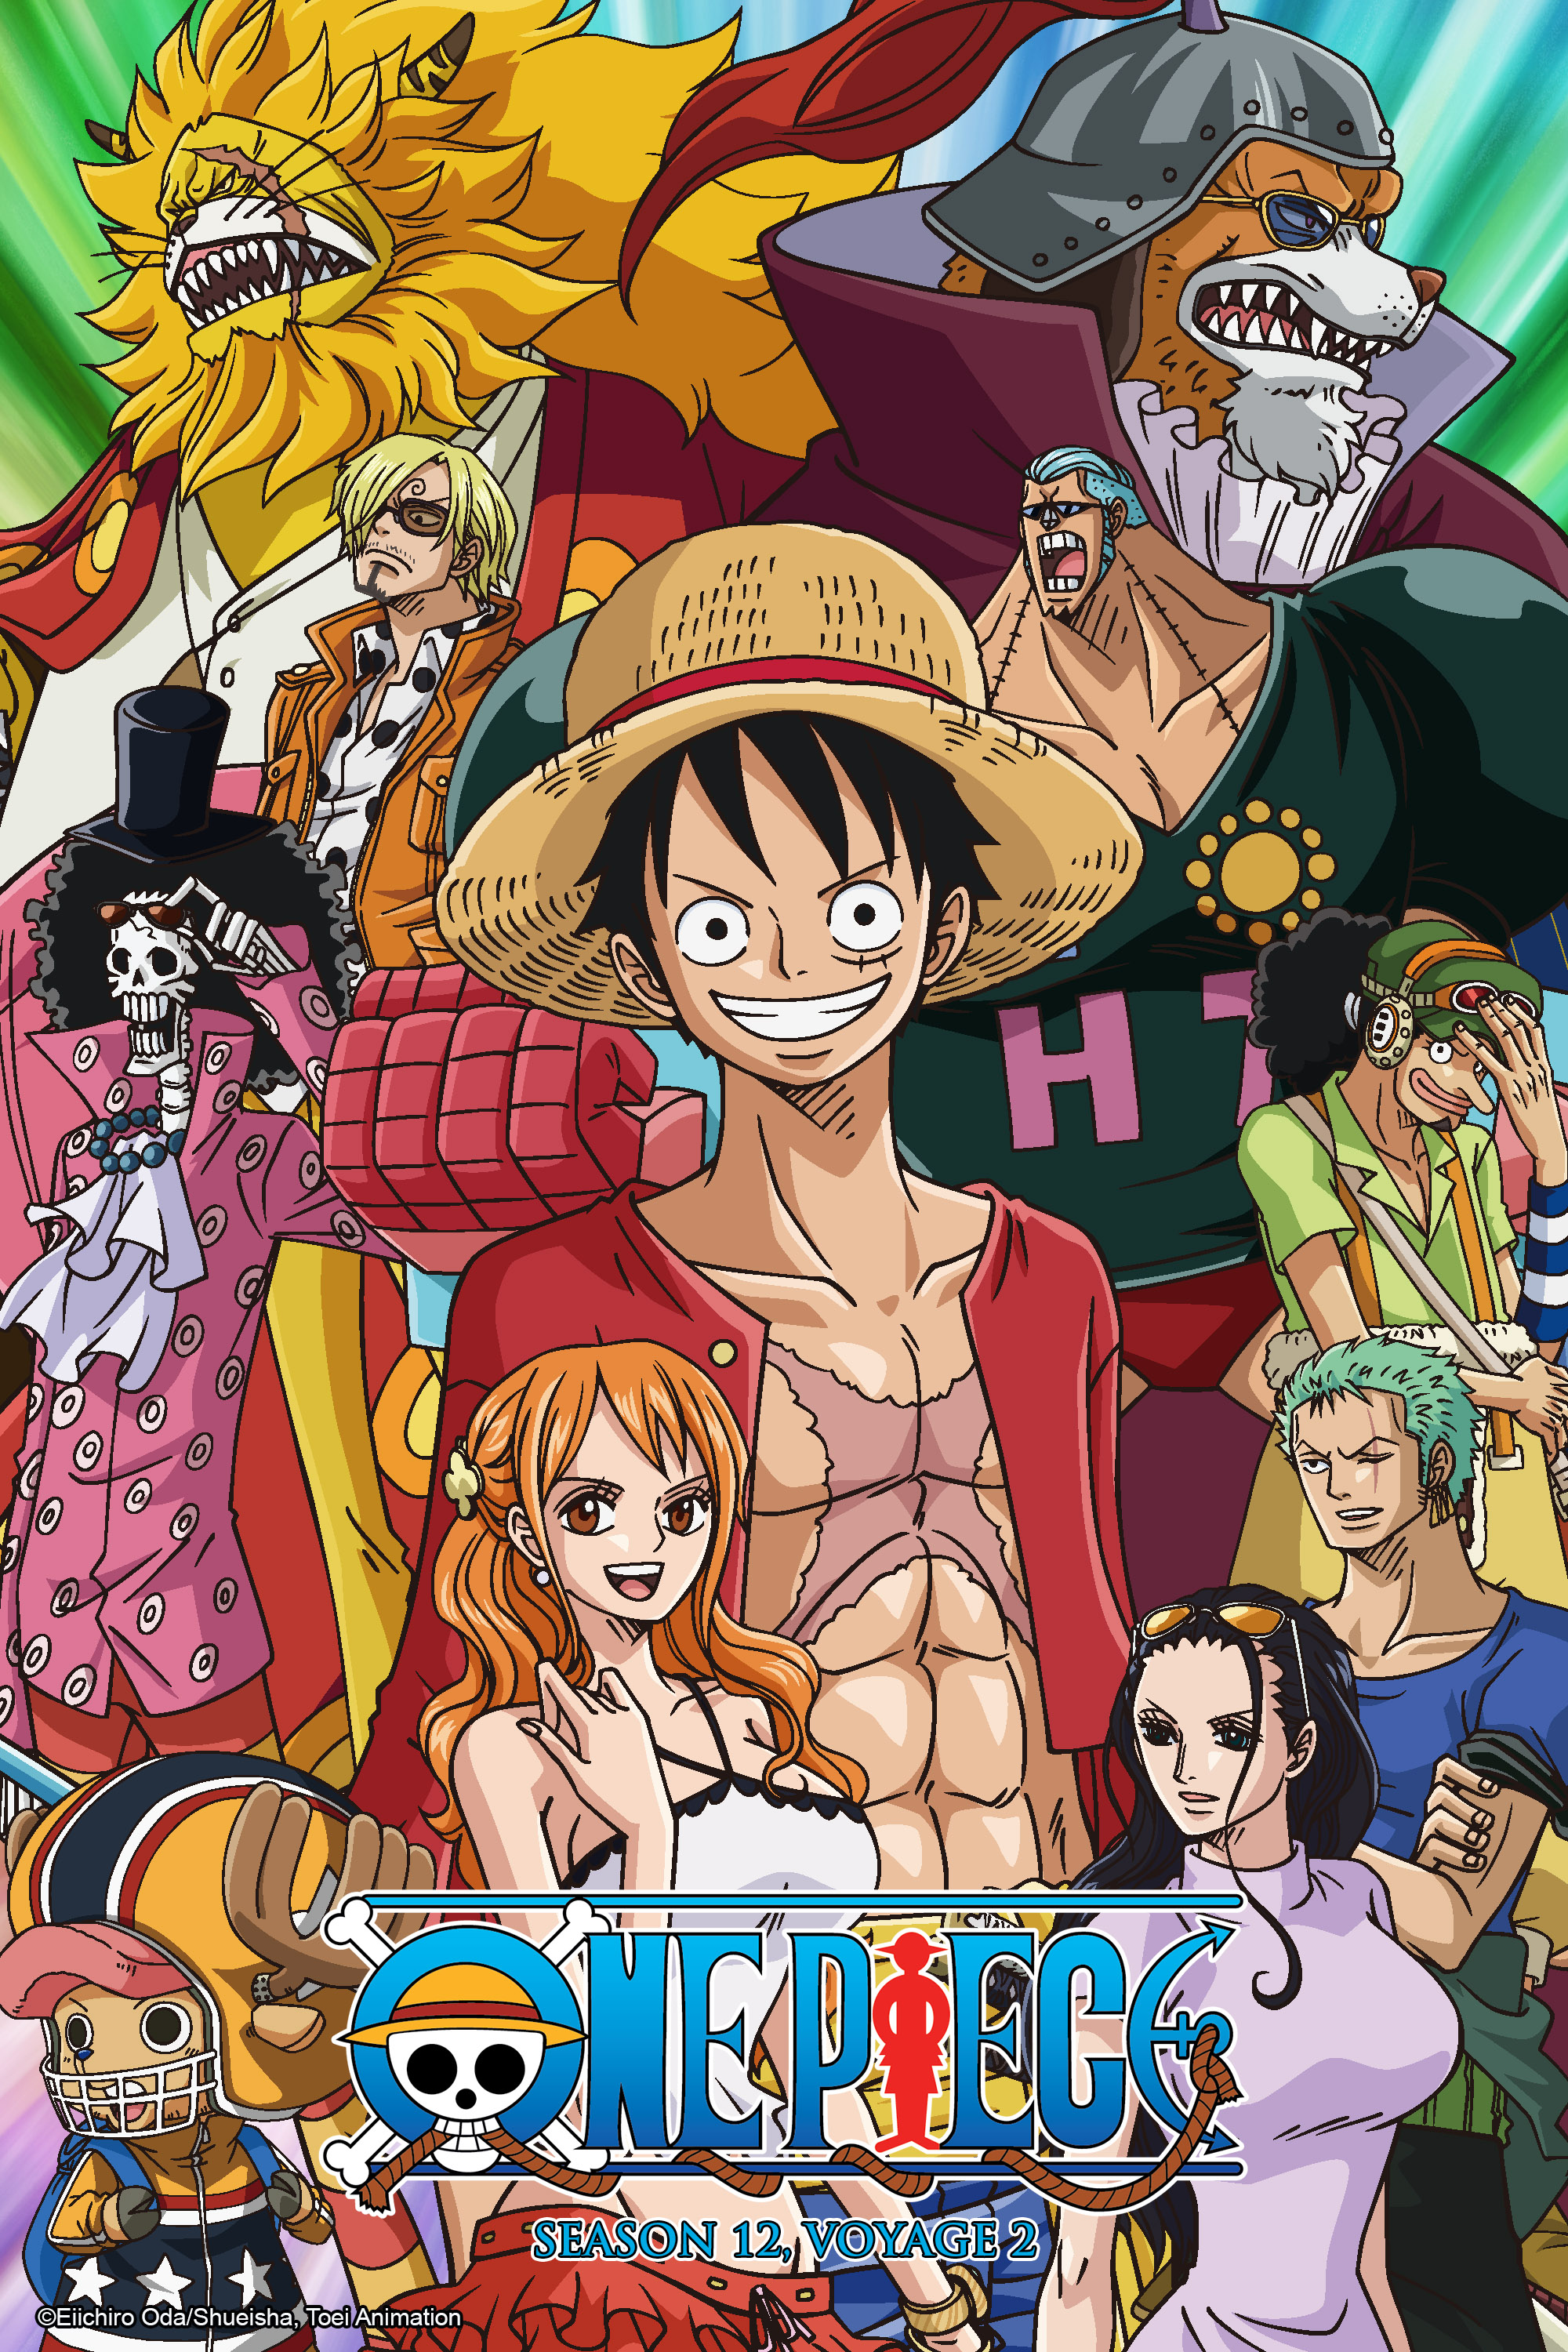 Toei Animation on X: Burn everything to dust, Kazenbo! #OnePiece episode  1058 is streaming now on Crunchyroll! 🔥🔥🔥  / X